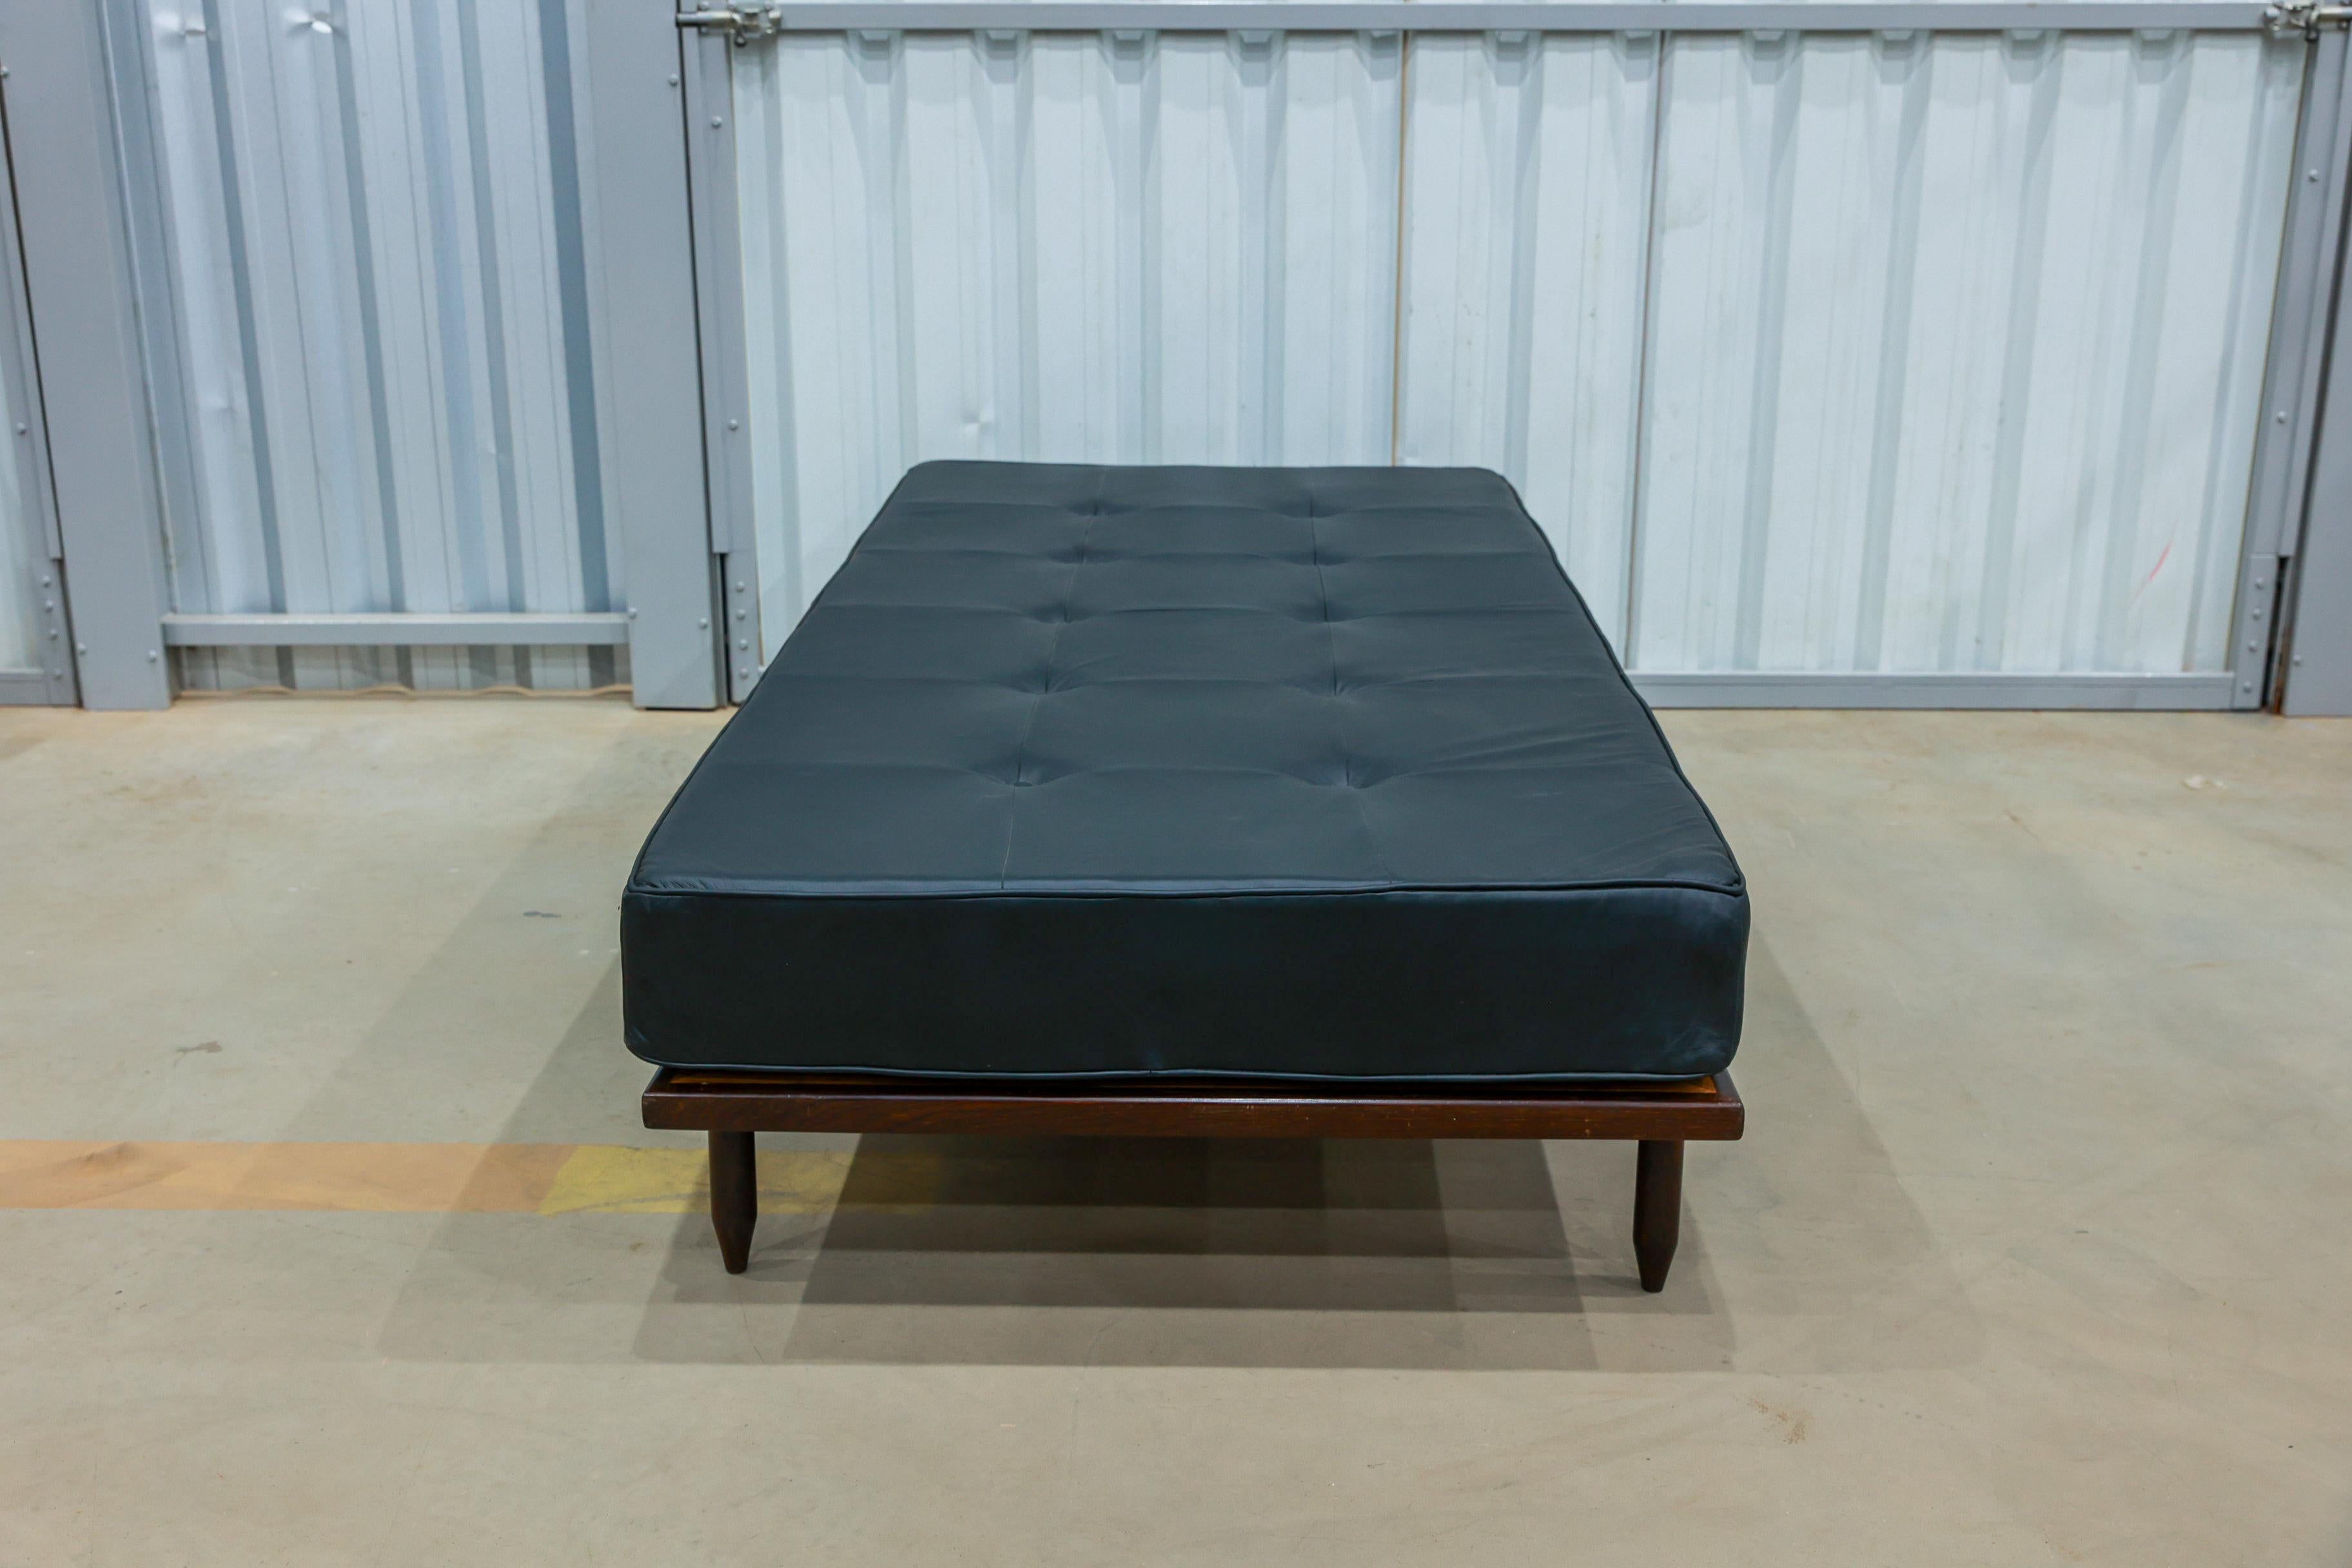 Hand-Painted Brazilian Modern Daybed in Hardwood & Black Leather, Carlo Hauner, Brazil, 1950s For Sale